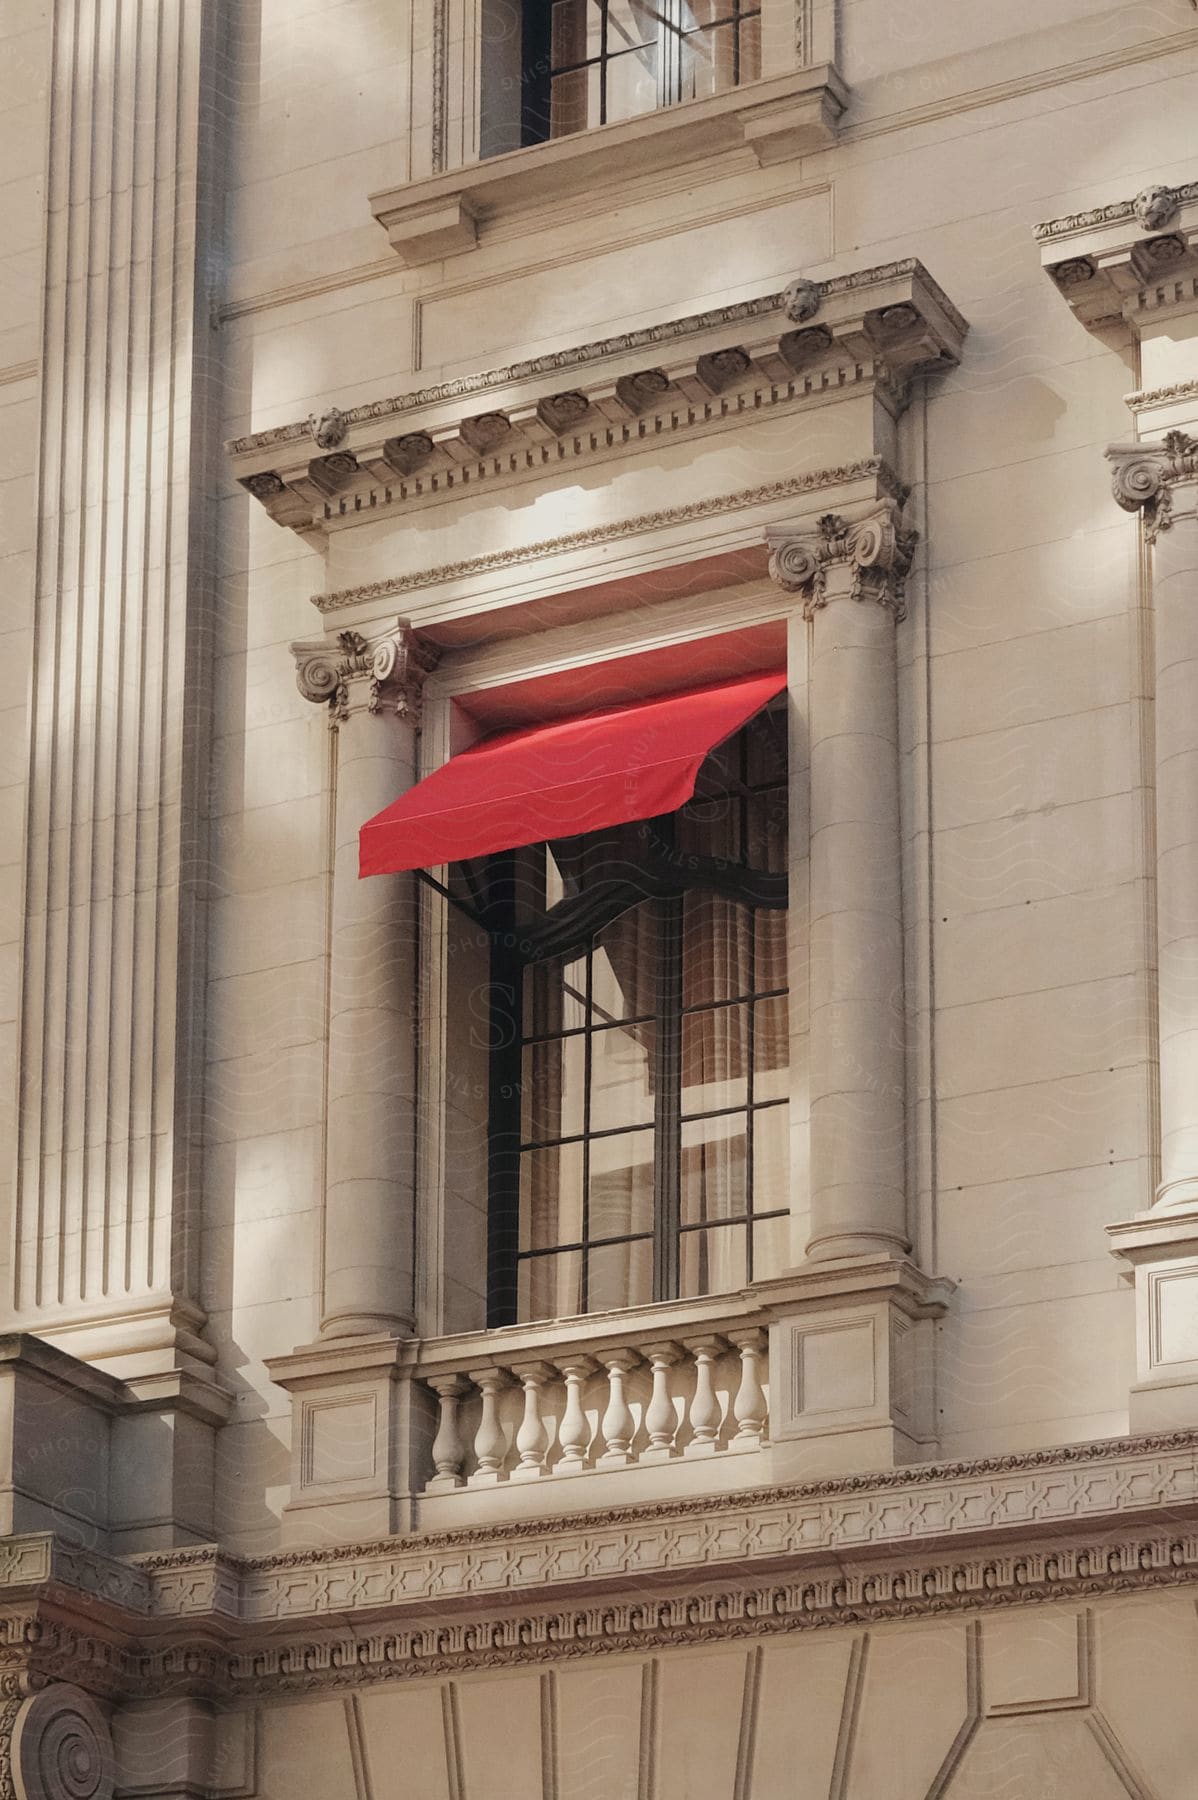 City building with architectural designs on walls and red awning over window